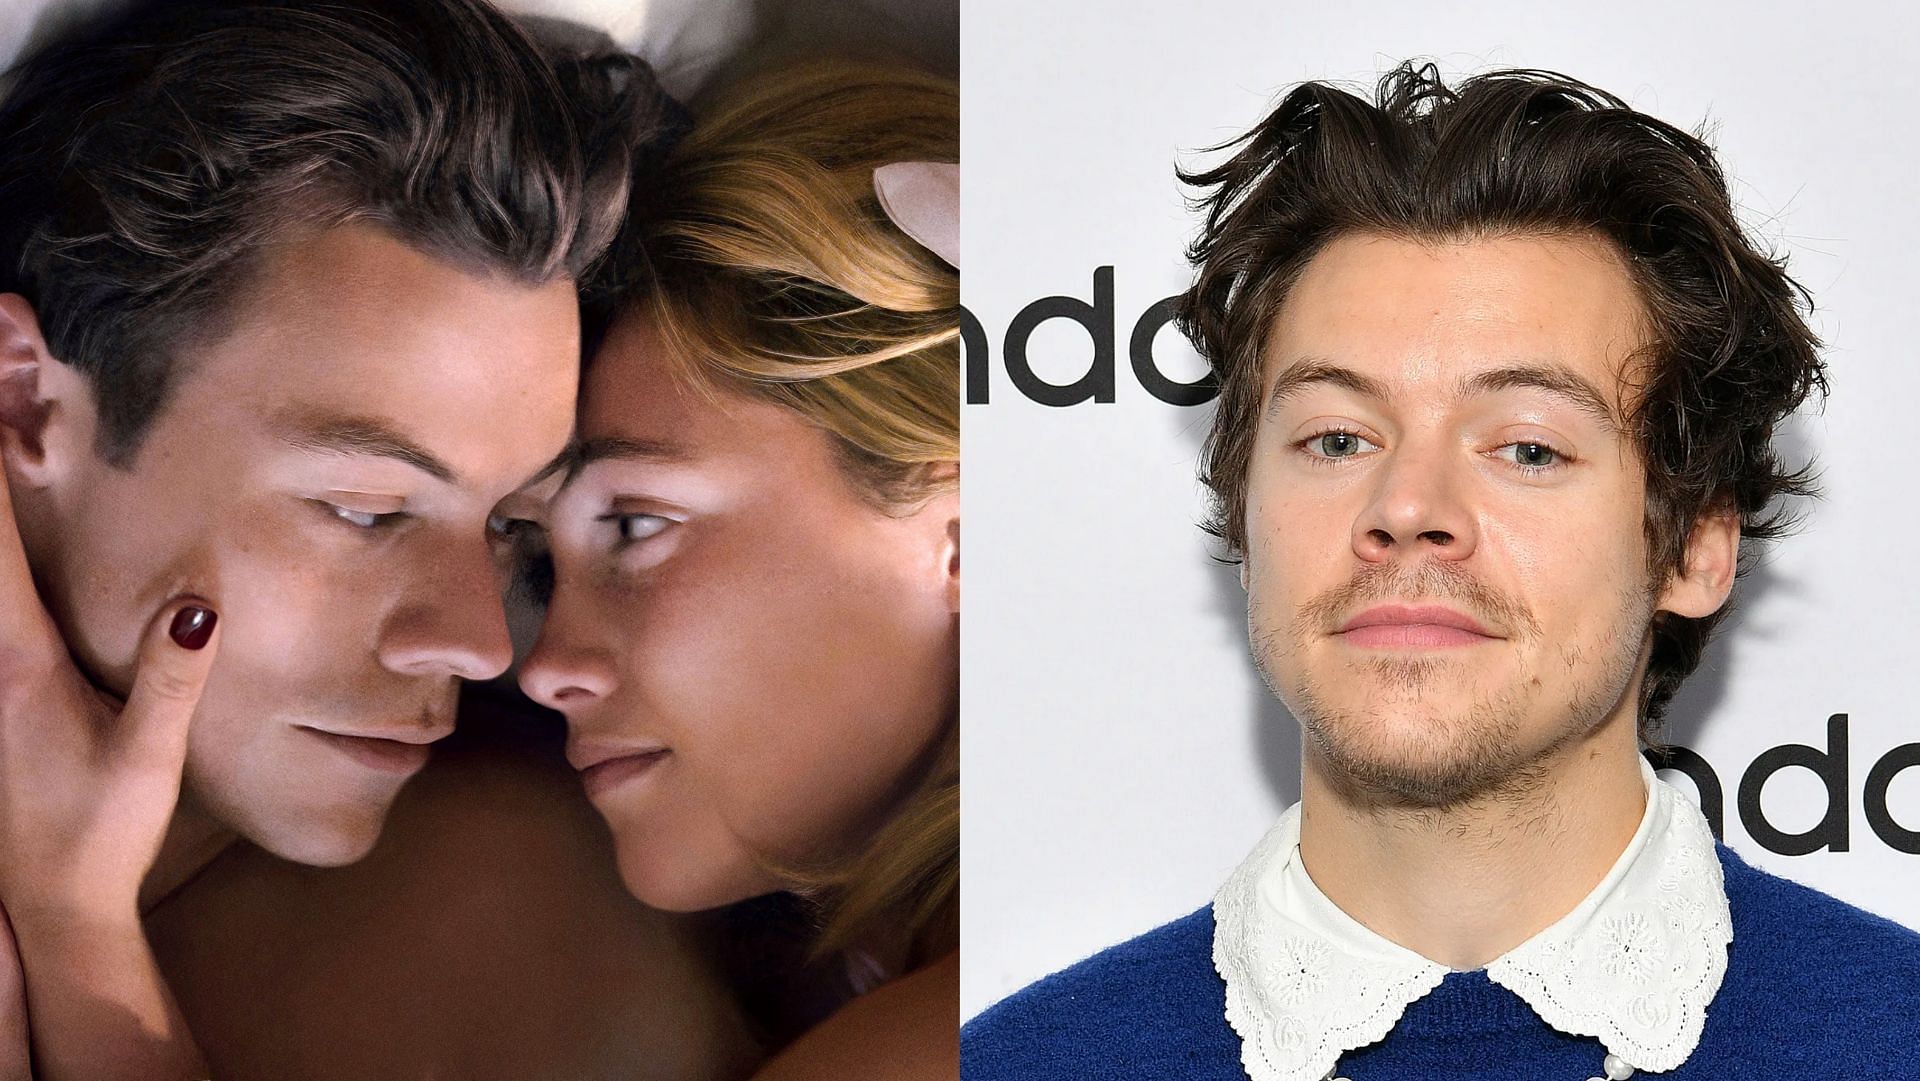 Hardin Scott Academy of acting: Harry Styles' acting in Don't Worry  Darling teaser leaves internet divided